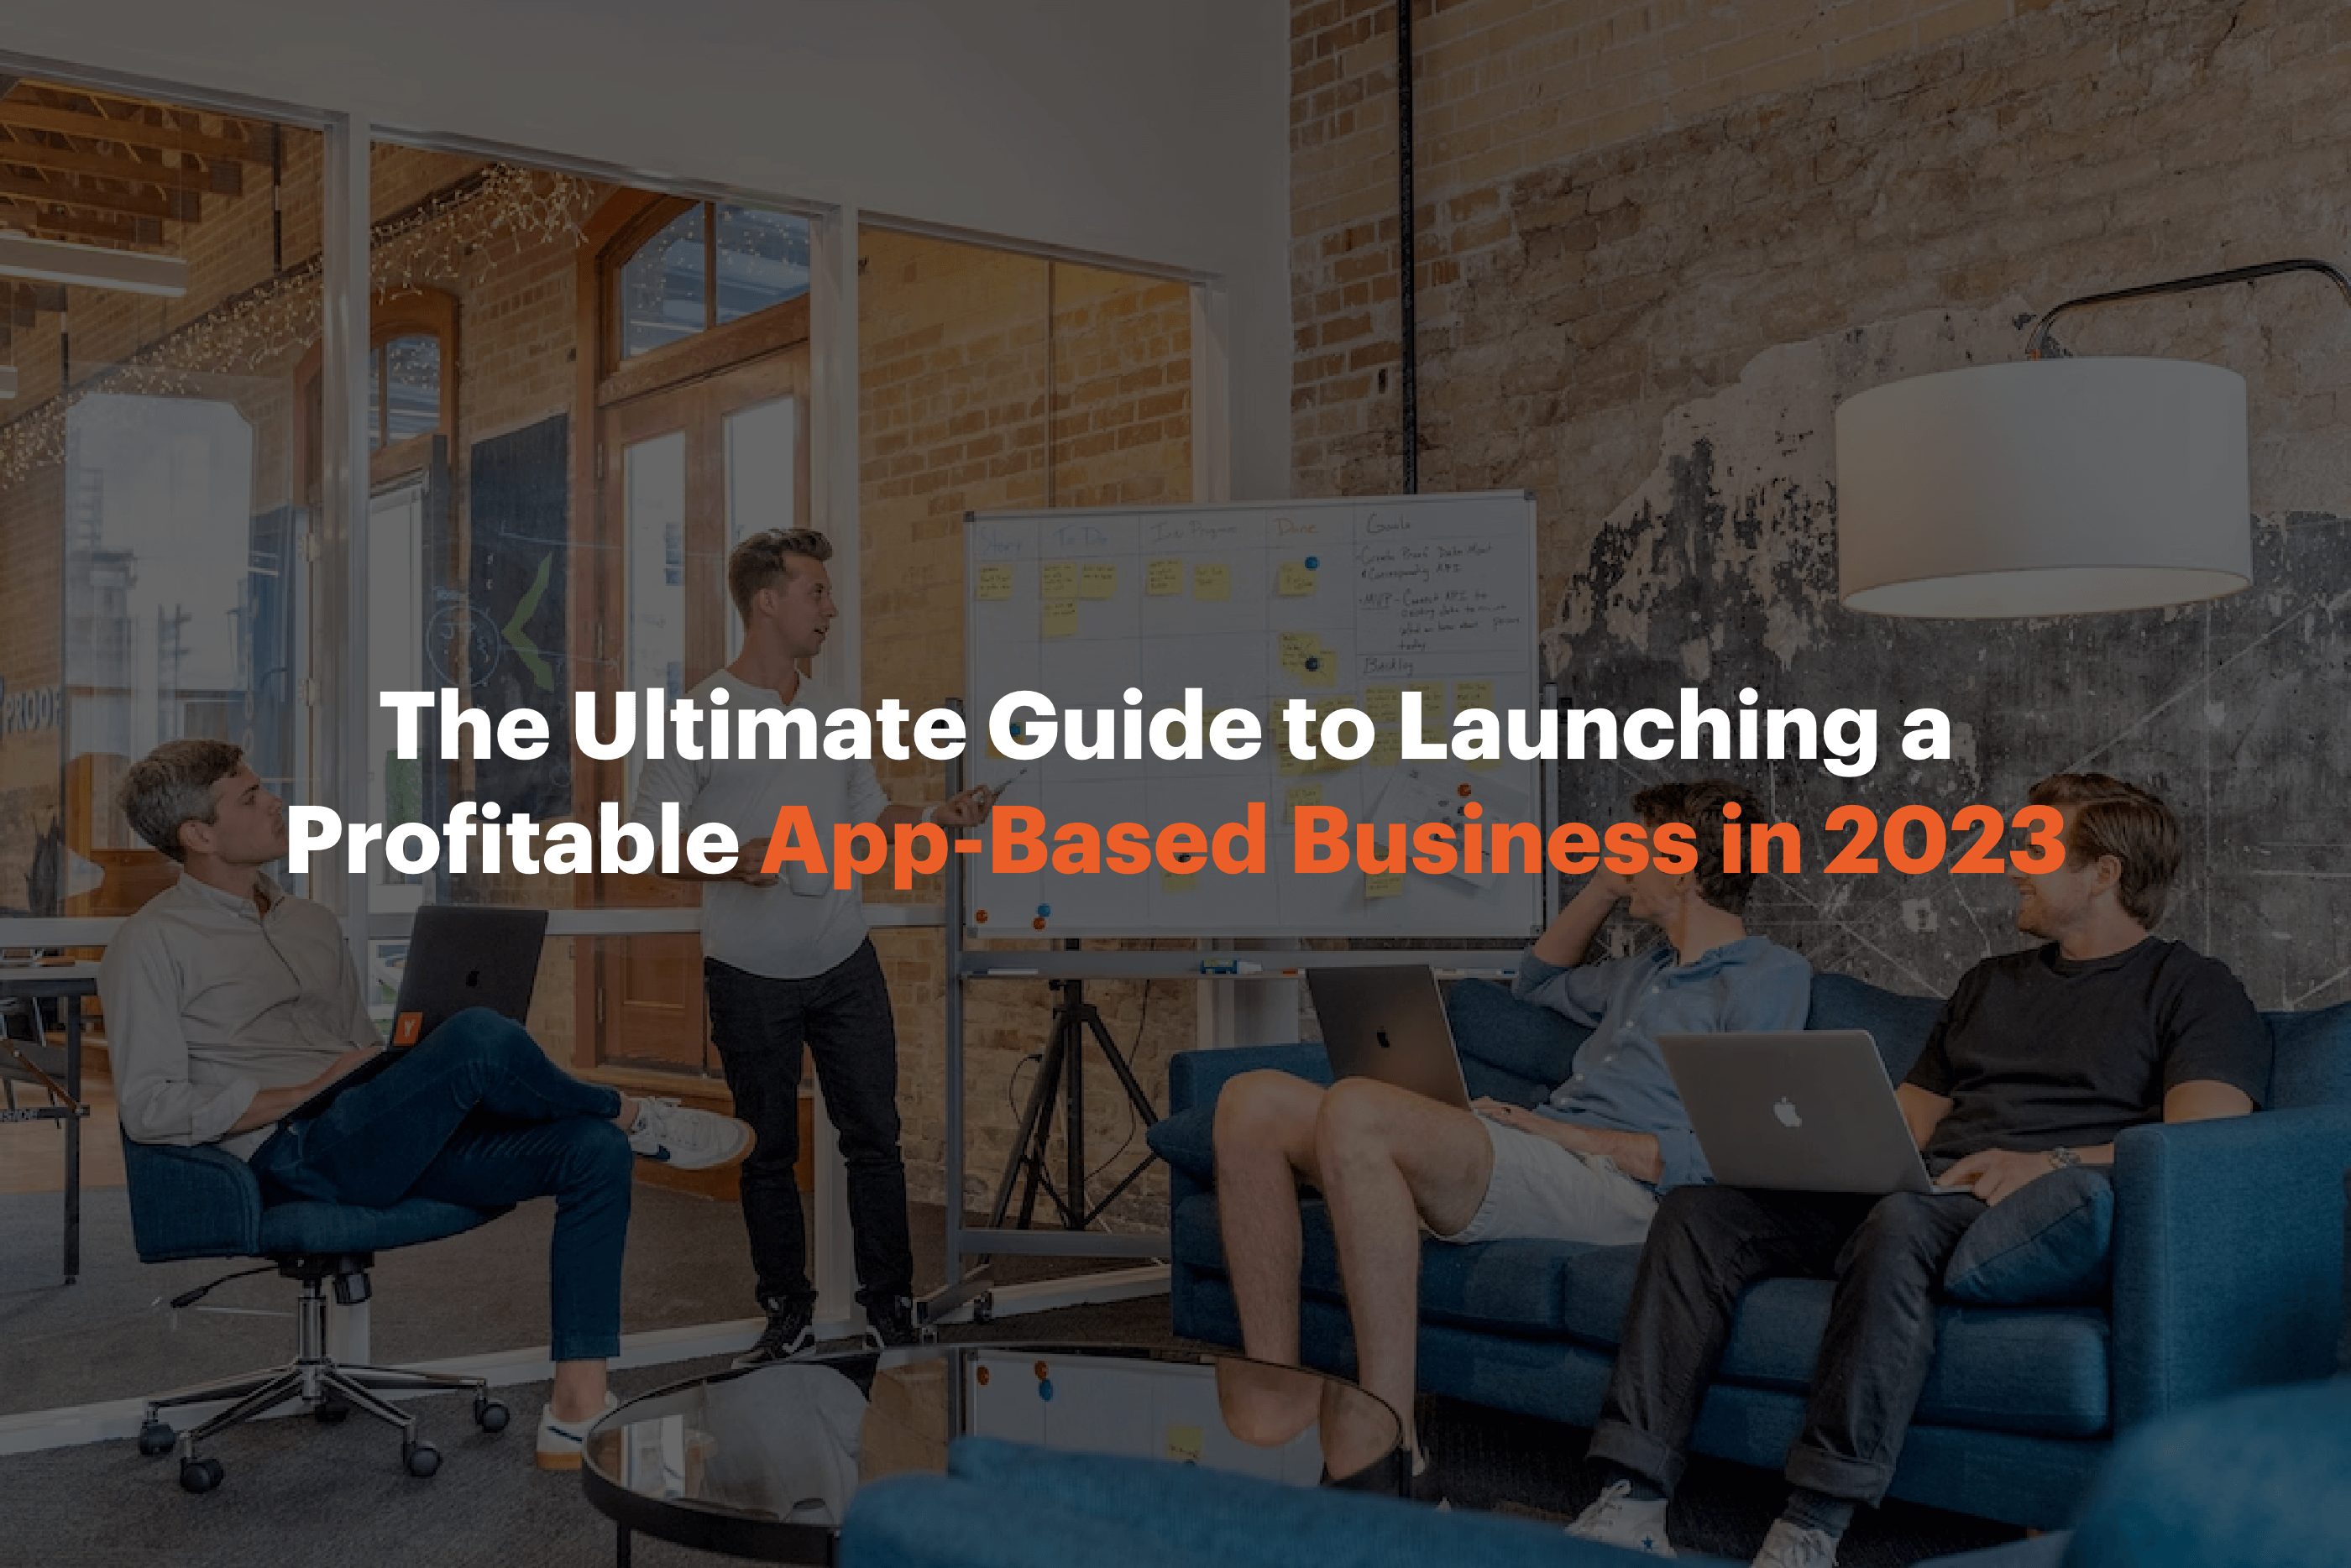 The Ultimate Guide to Launching a Profitable App-Based Business in 2023